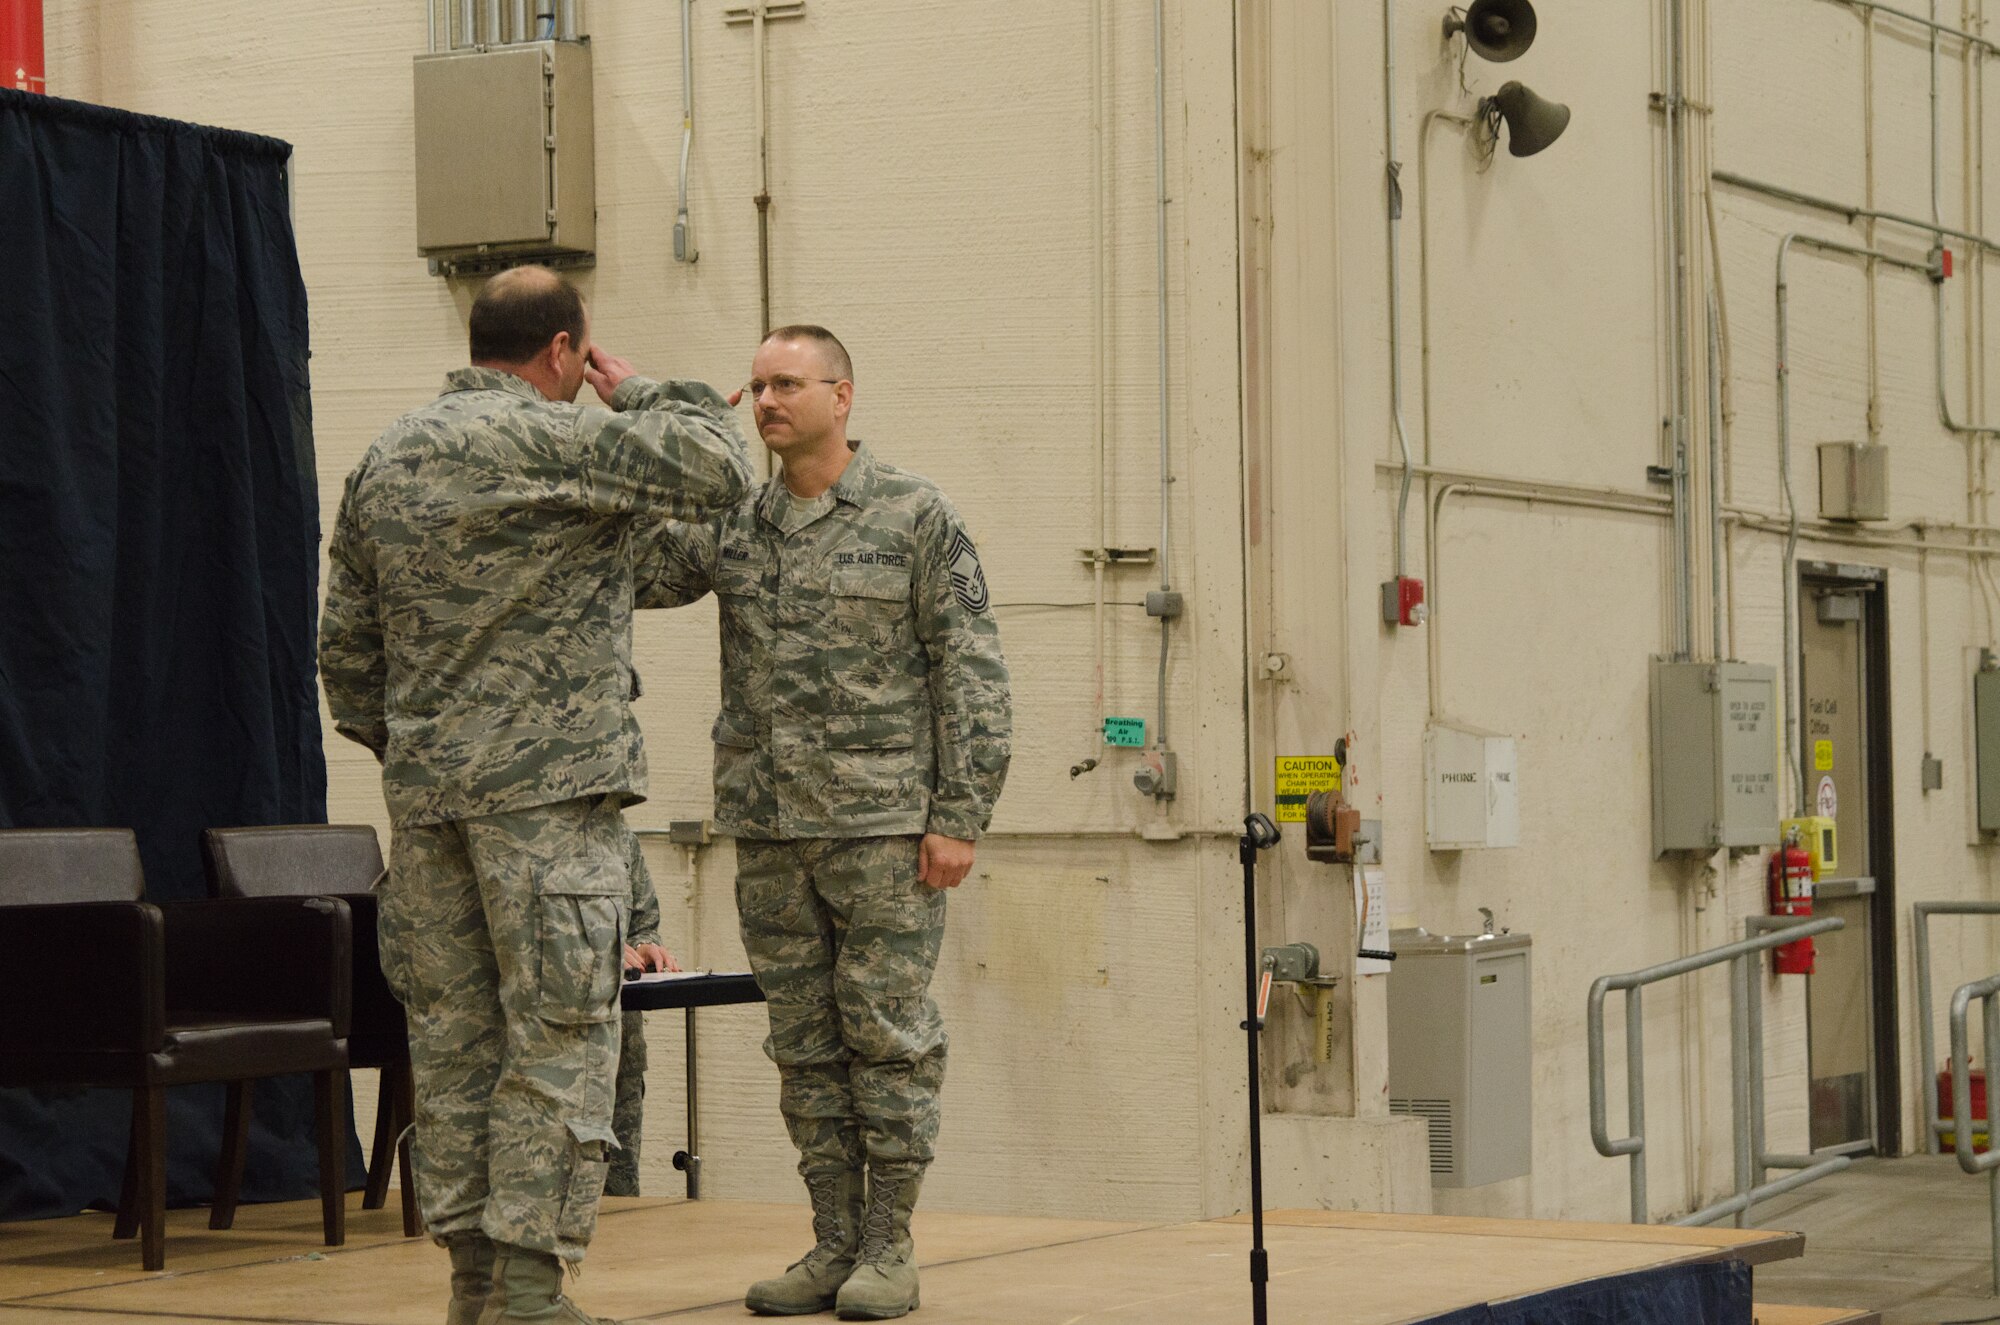 U.S. Air Force Chief Master Sgt. Randy Miller assumes authority of the 139th Airlift Wing’s highest enlisted position, command chief master sergeant, at Rosecrans Air National Guard Base, Mo., Feb. 8, 2014.  Miller has nearly 30 years of service with the 139th Airlift Wing. (U.S. Air National Guard photo by Tech. Sgt. Theo Ramsey/Released)